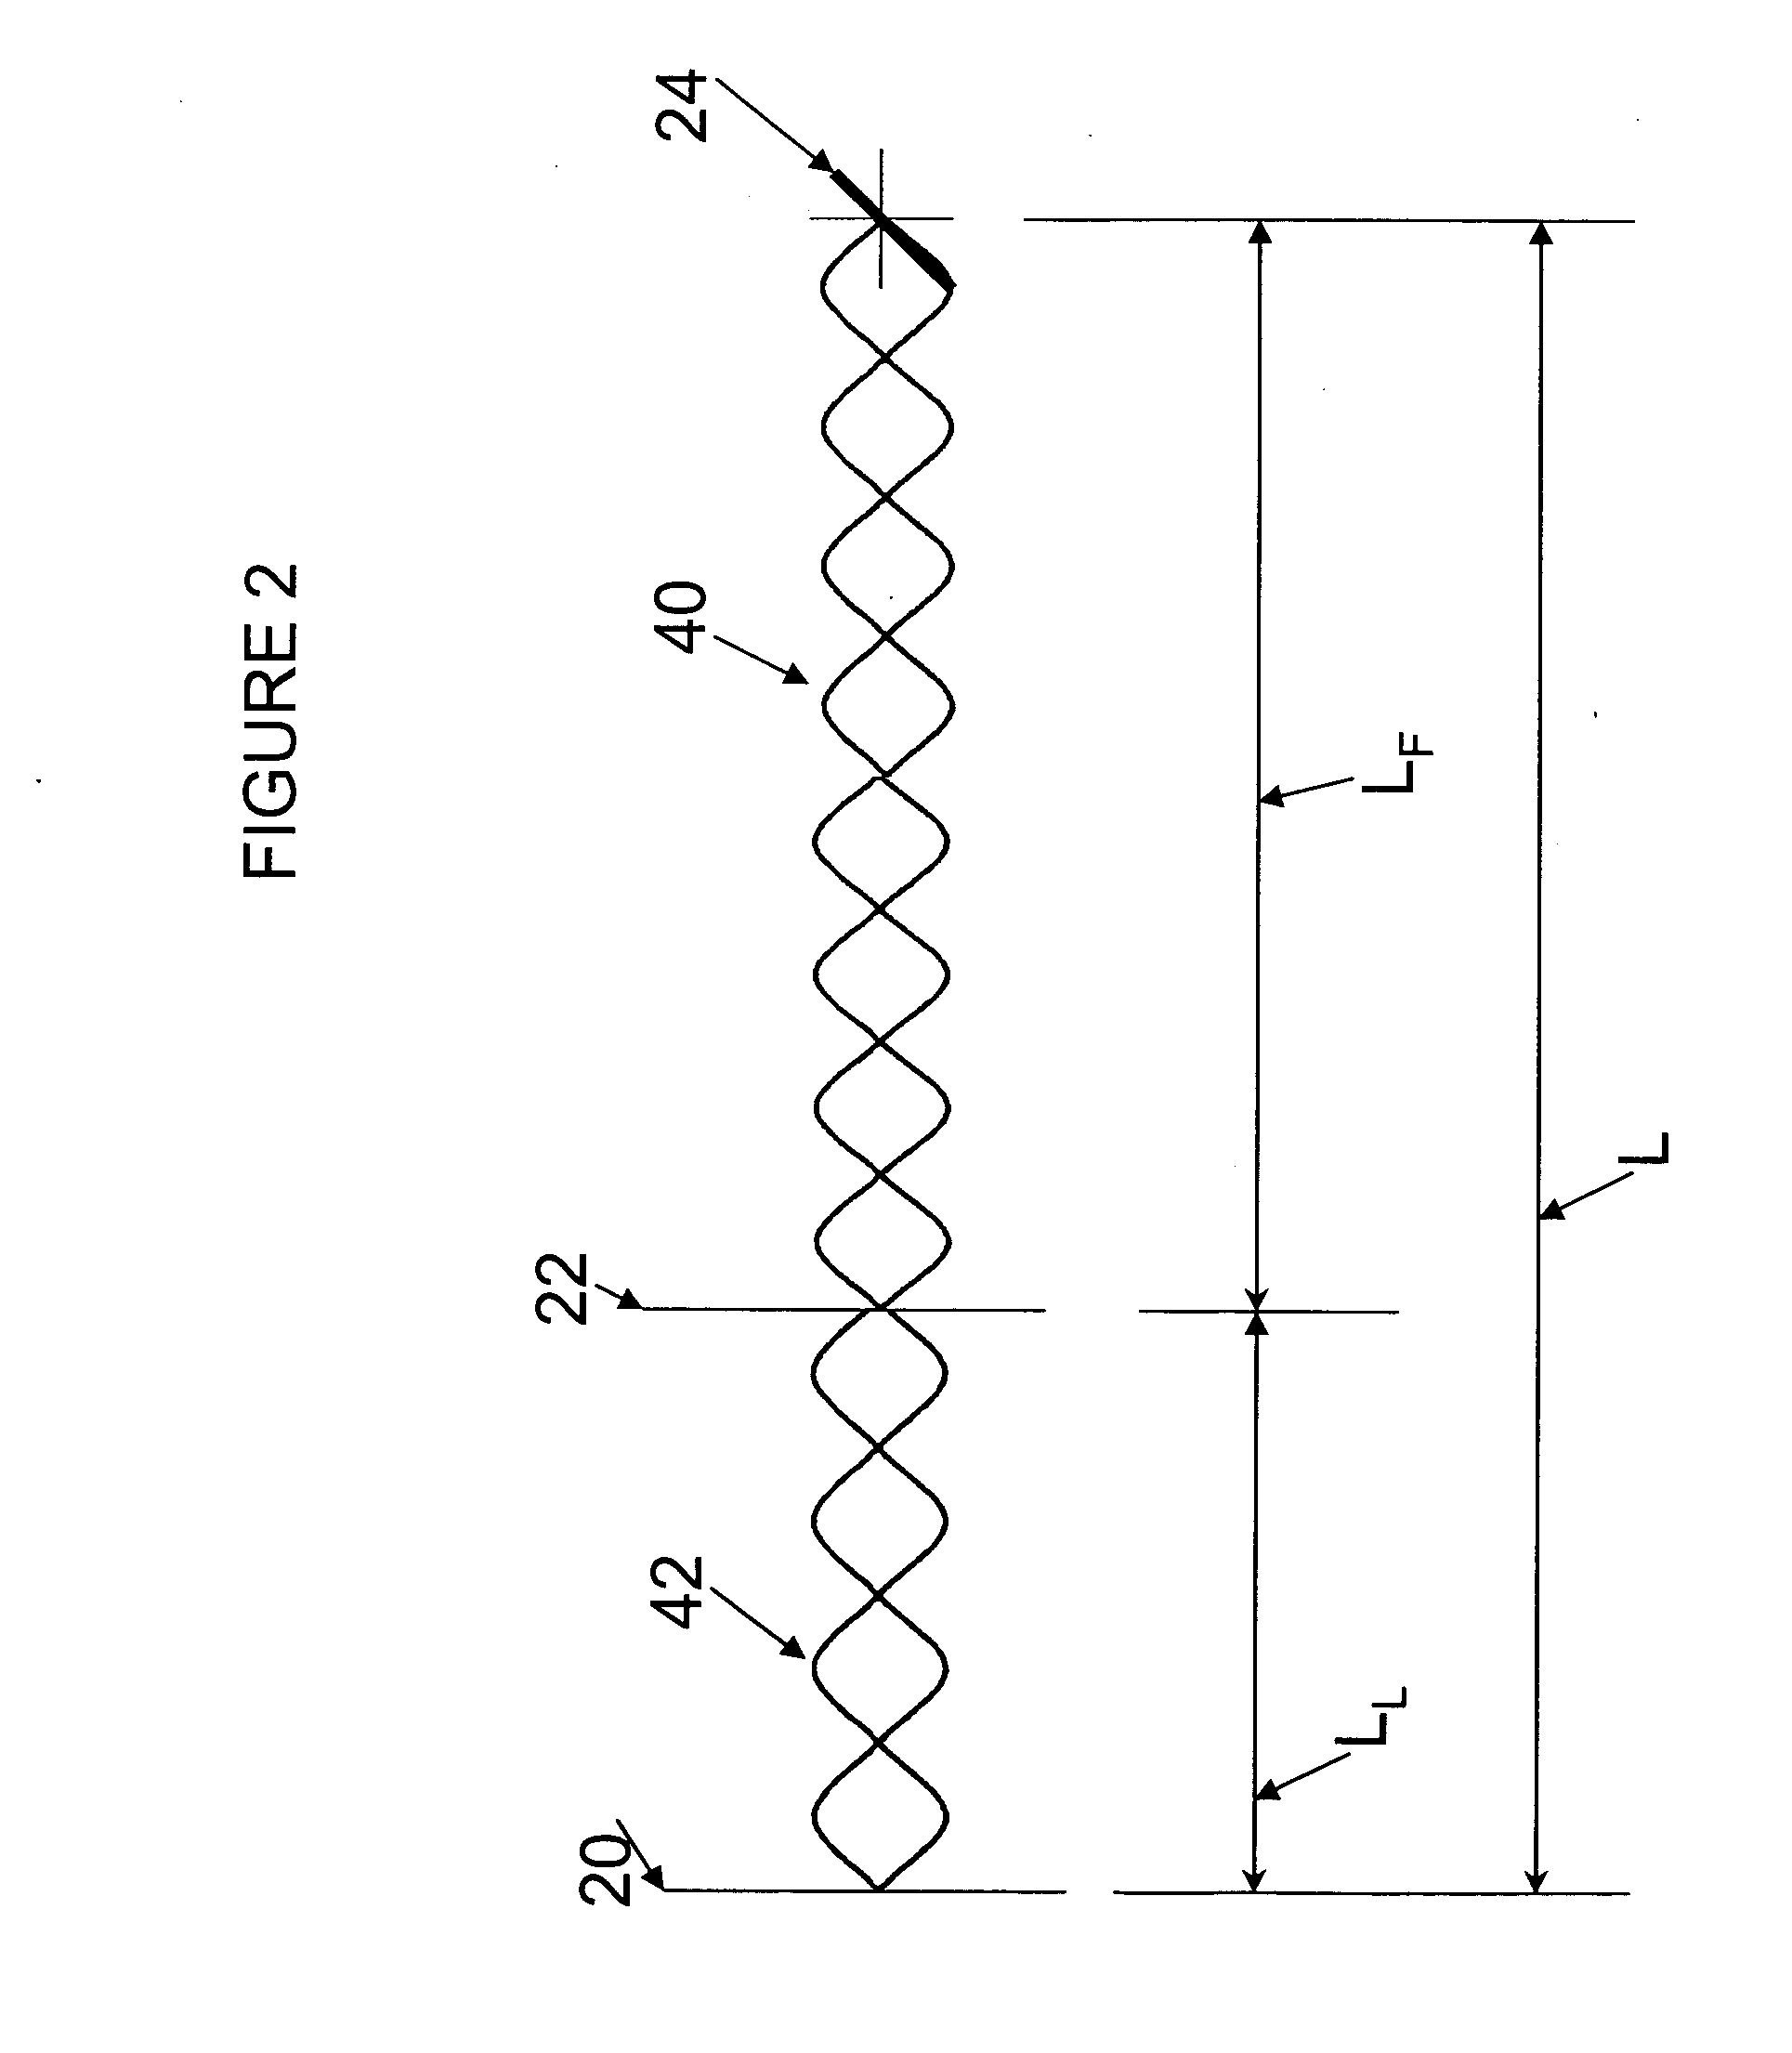 Mode-matching system for tunable external cavity laser